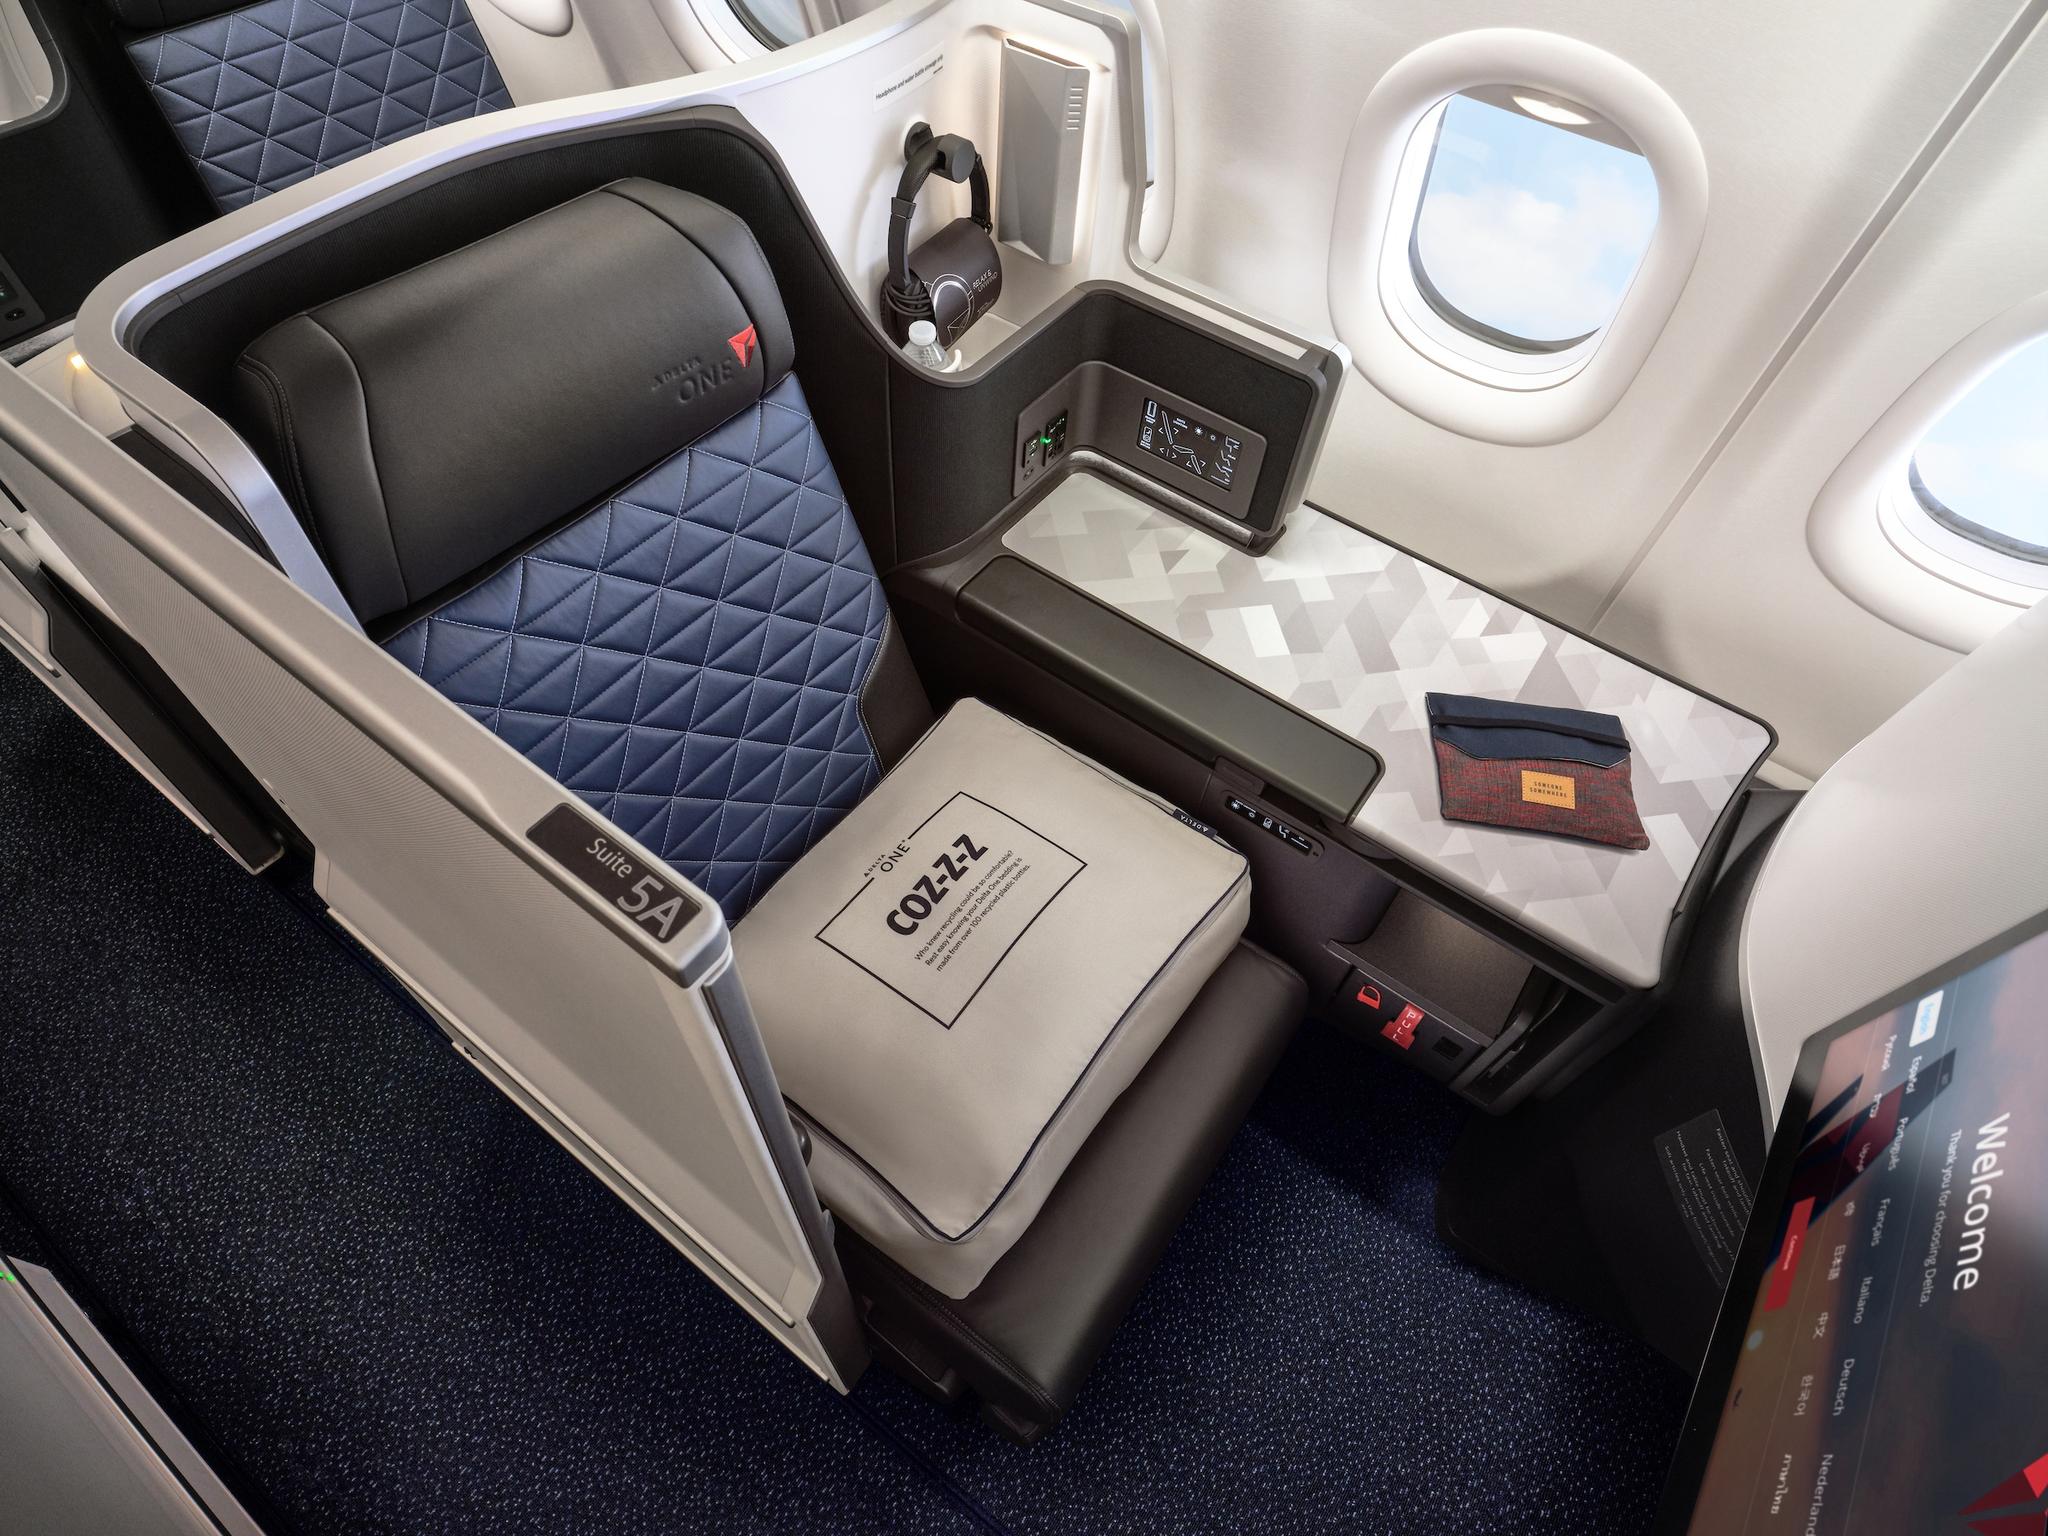 Review: Delta One business class